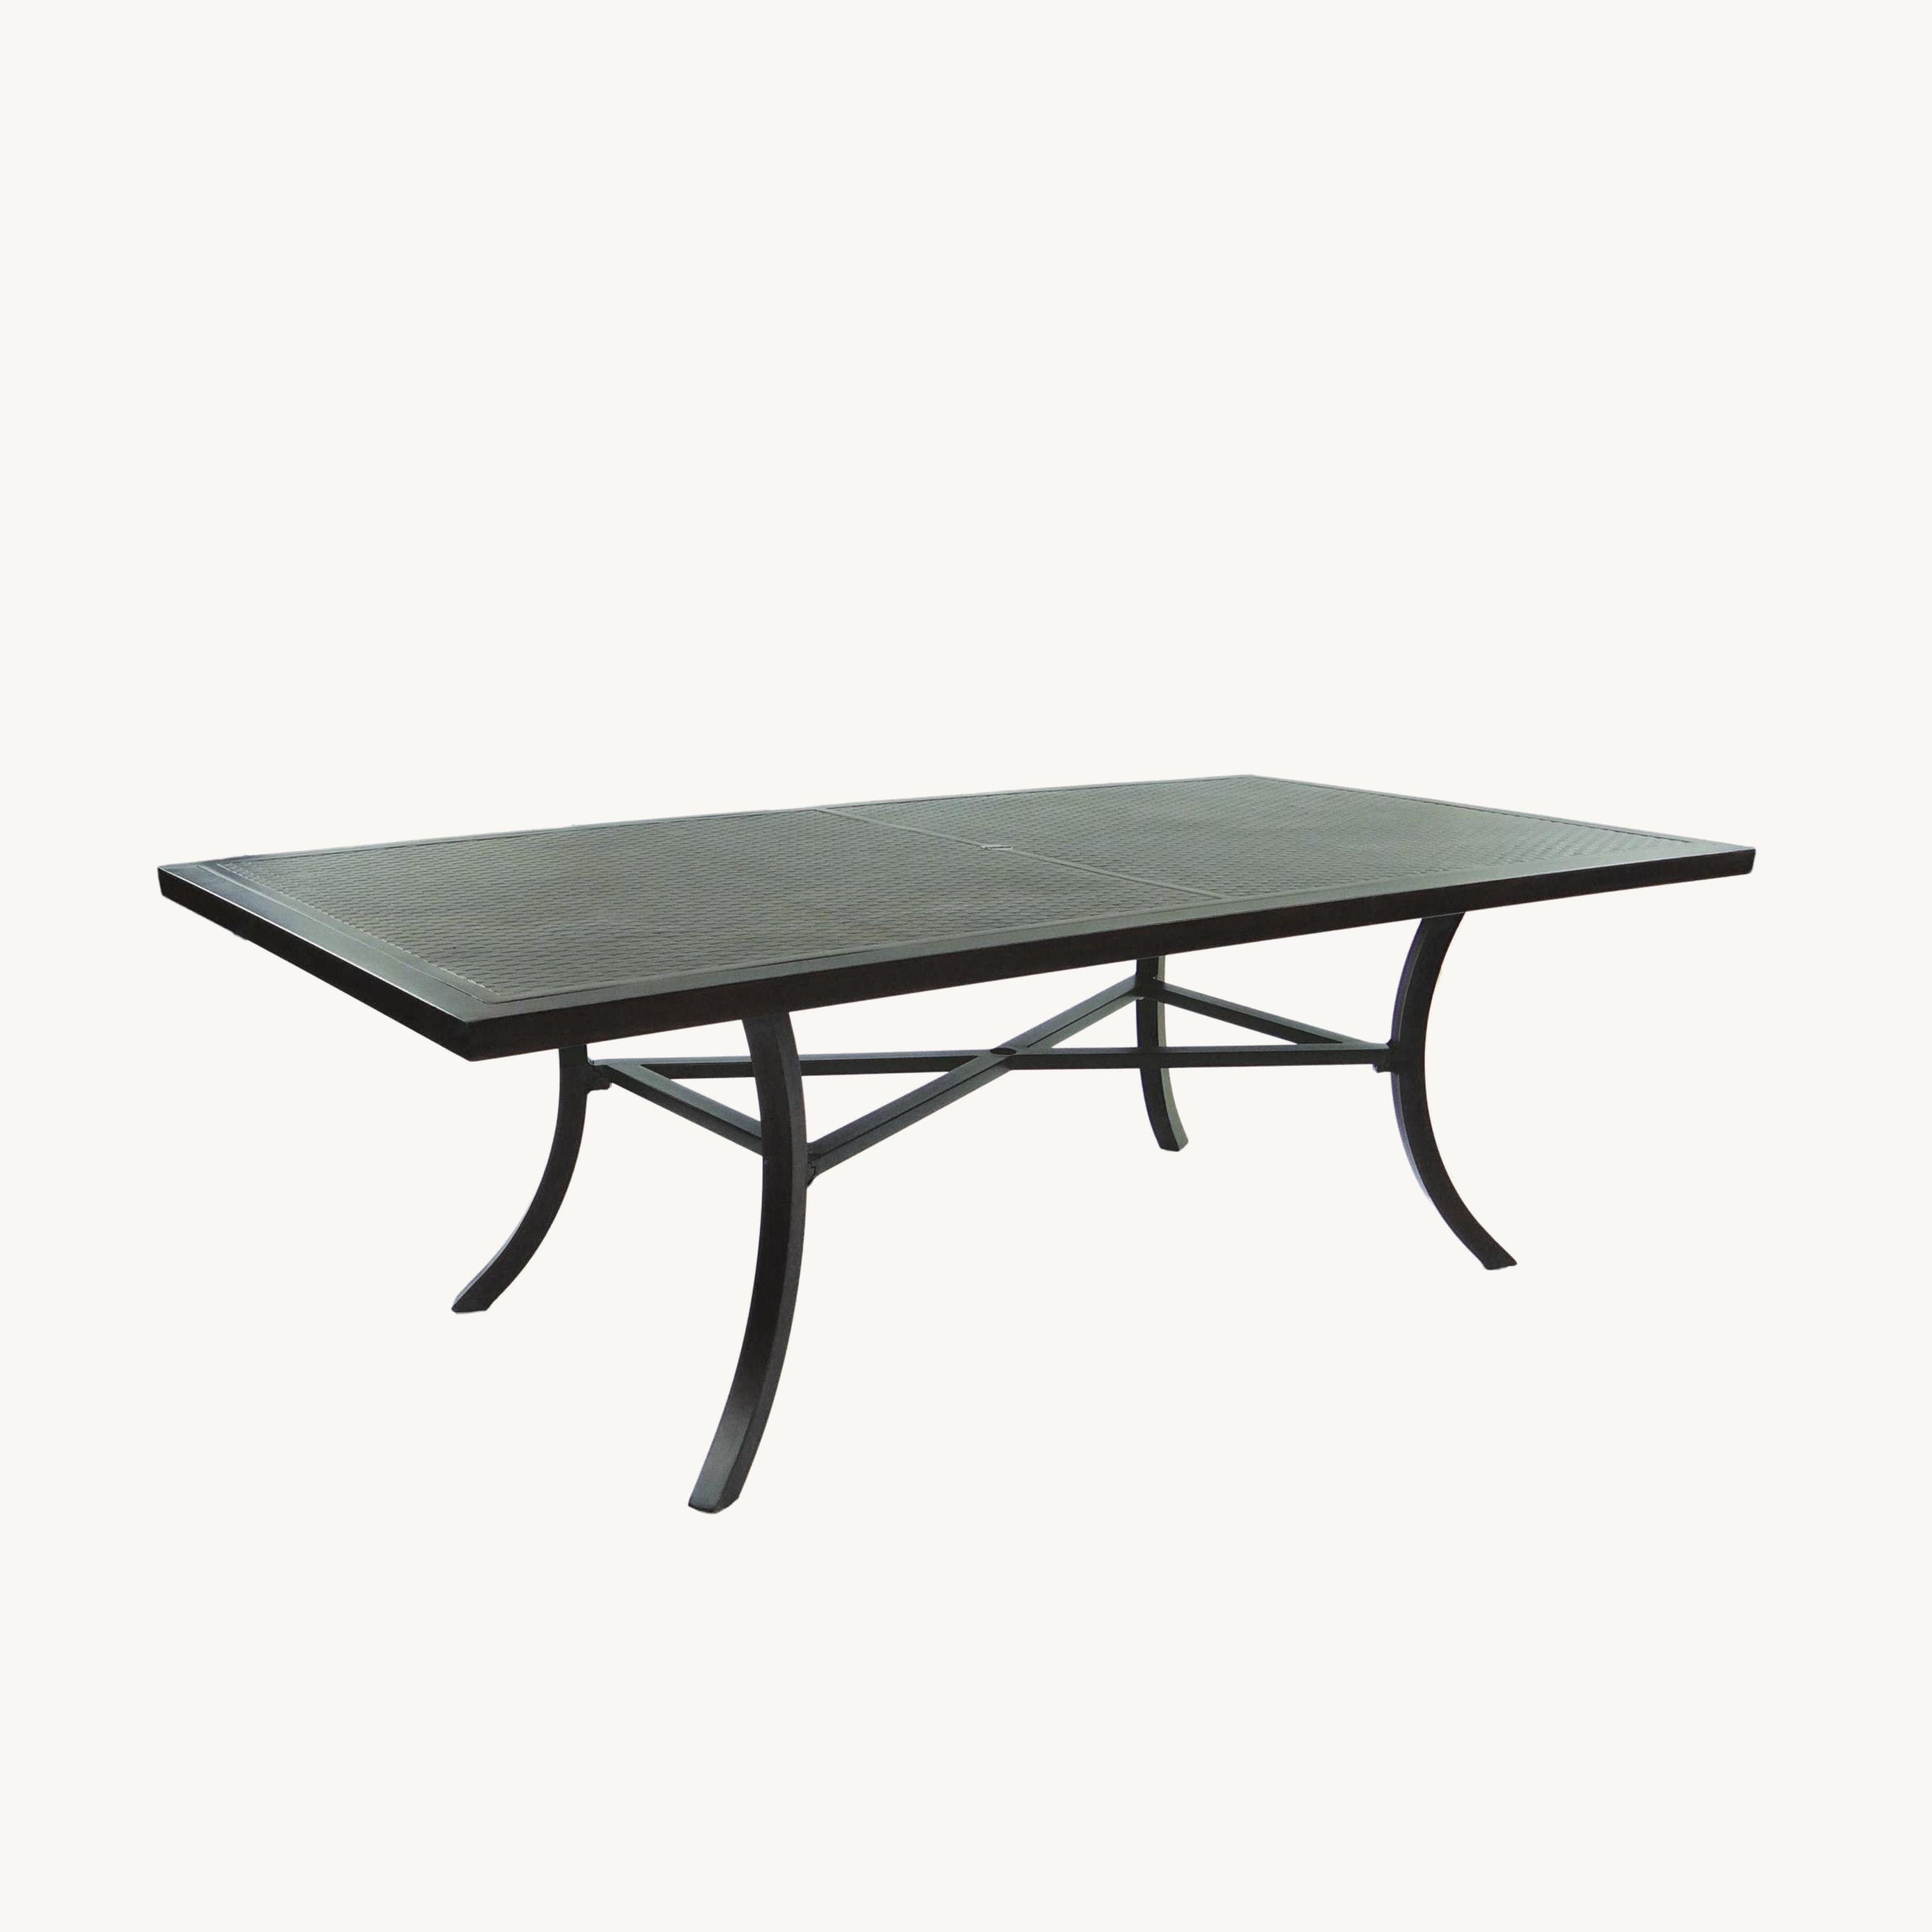 Classical 44" X 84" Rectangular Dining Table By Castelle